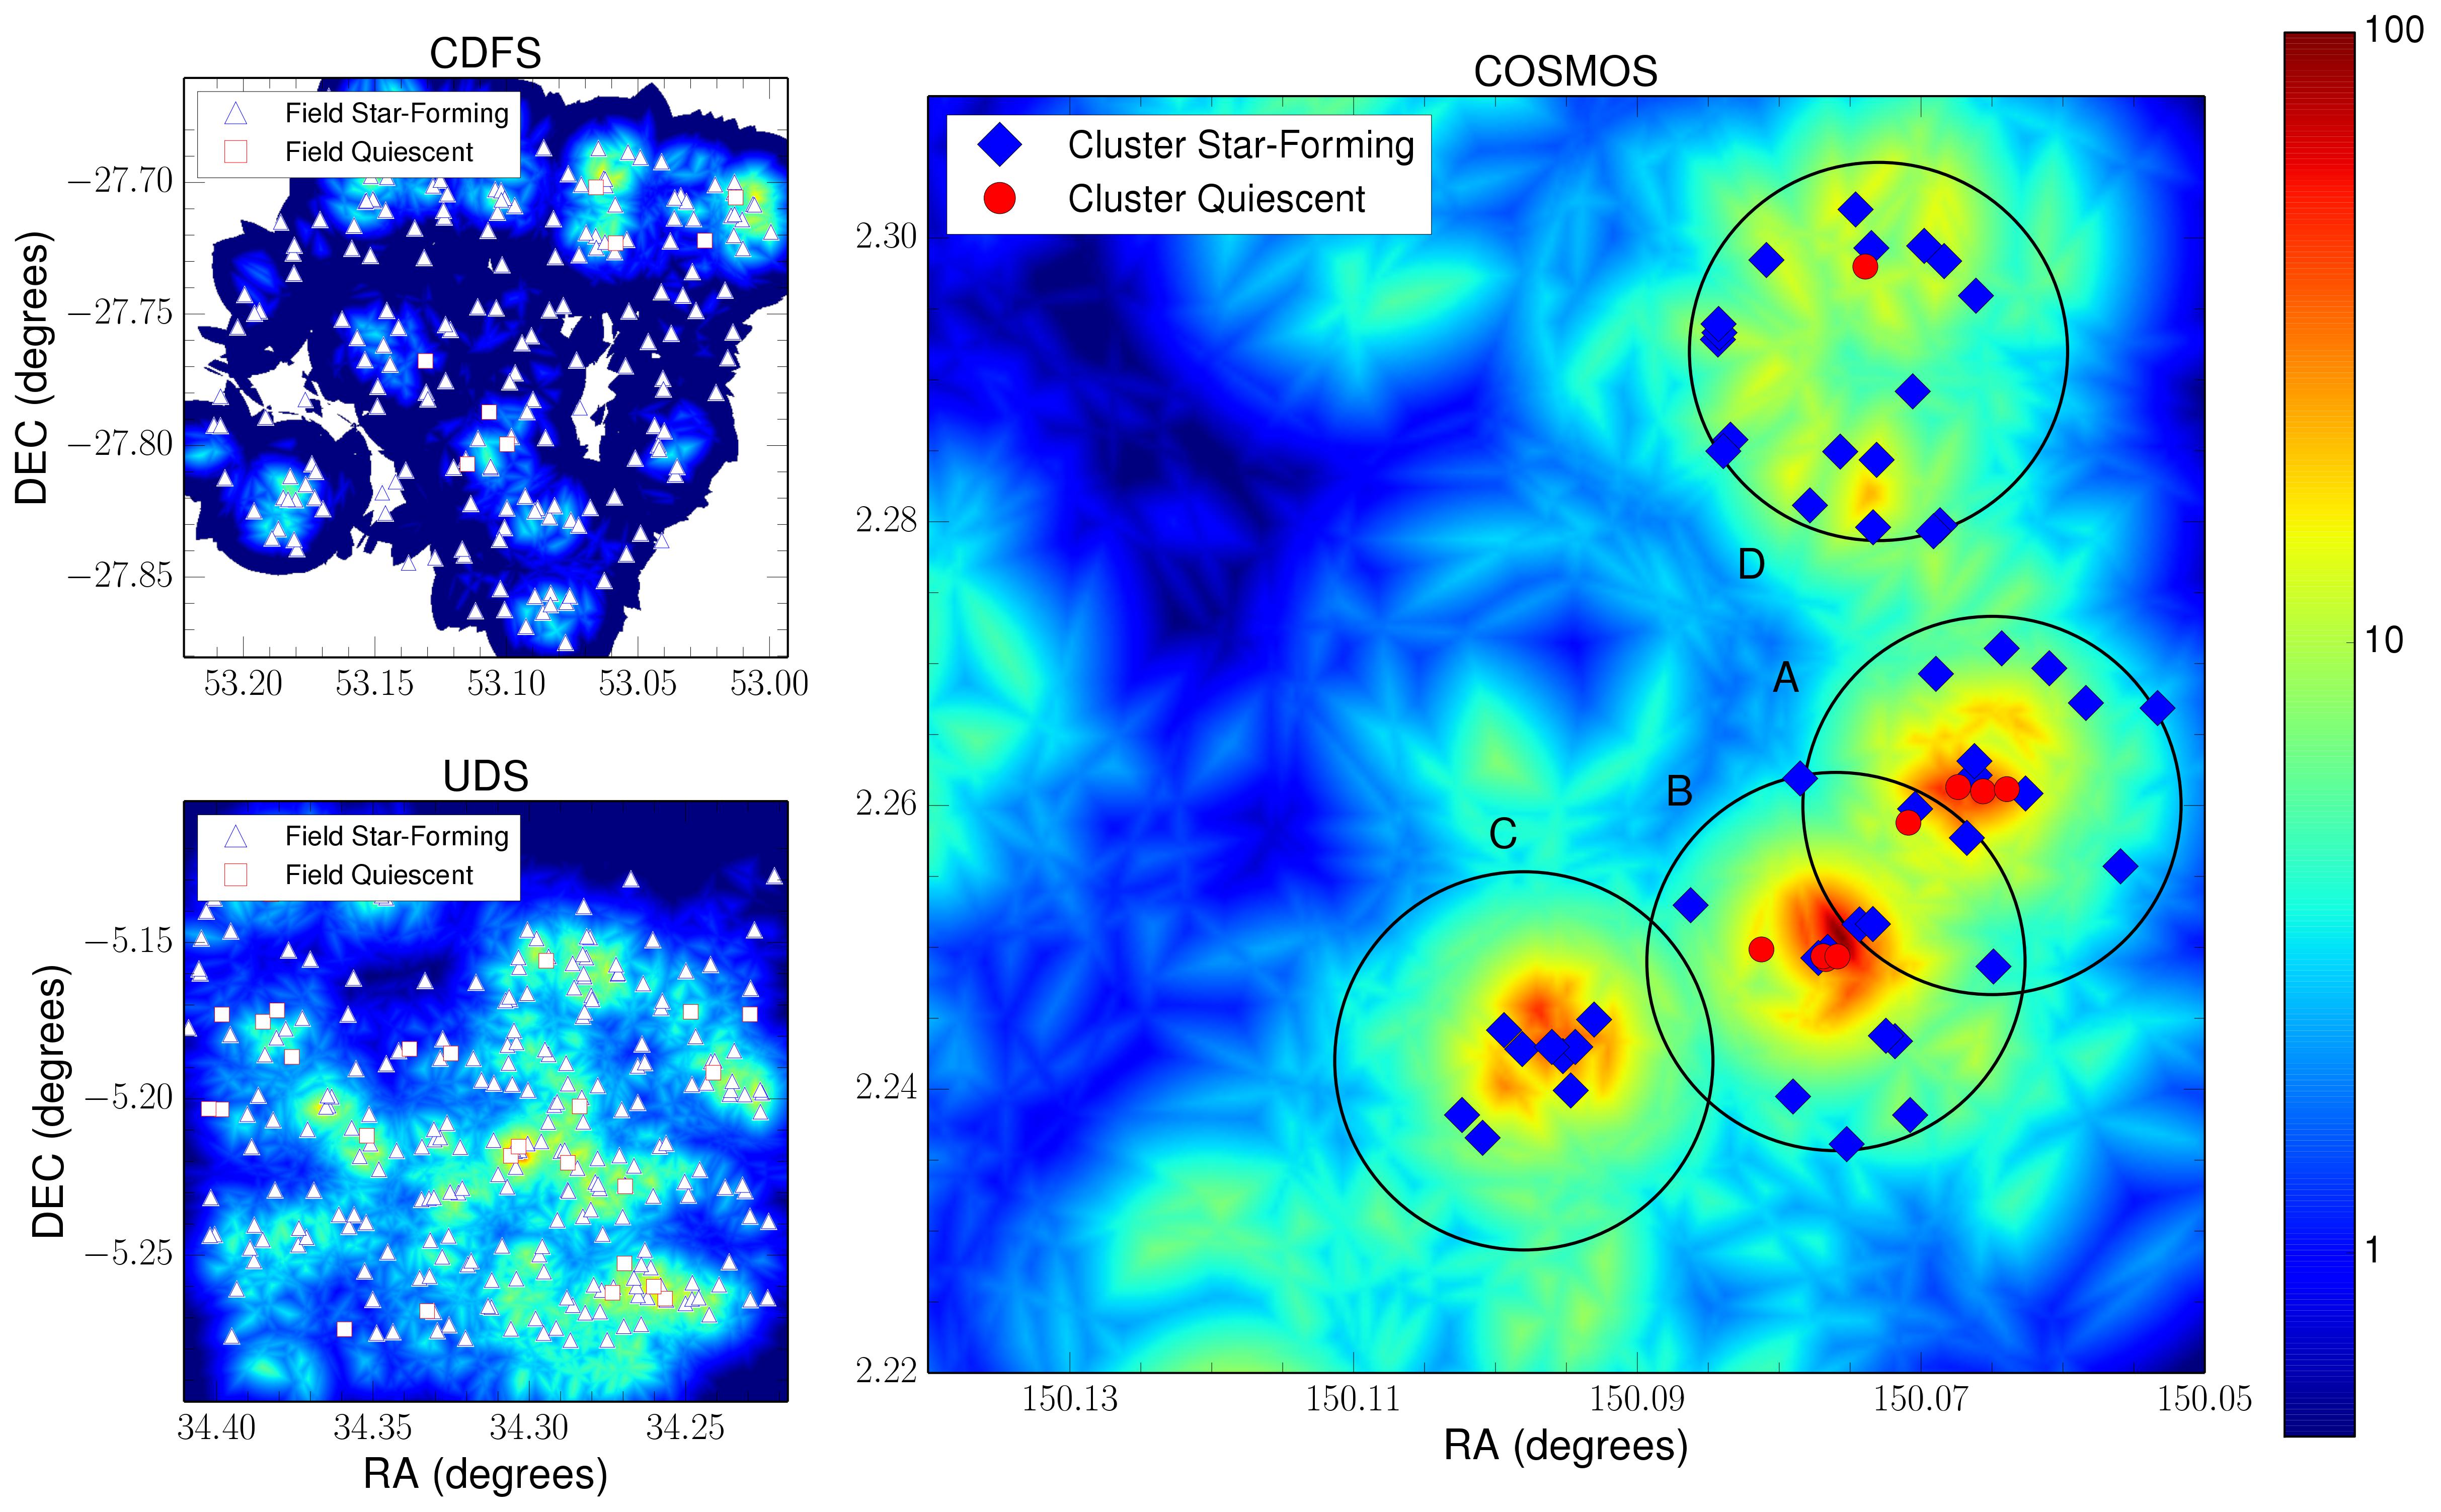 Seventh-nearest-neighbor projected density maps of CDFS, UDS, and COSMOS fields.